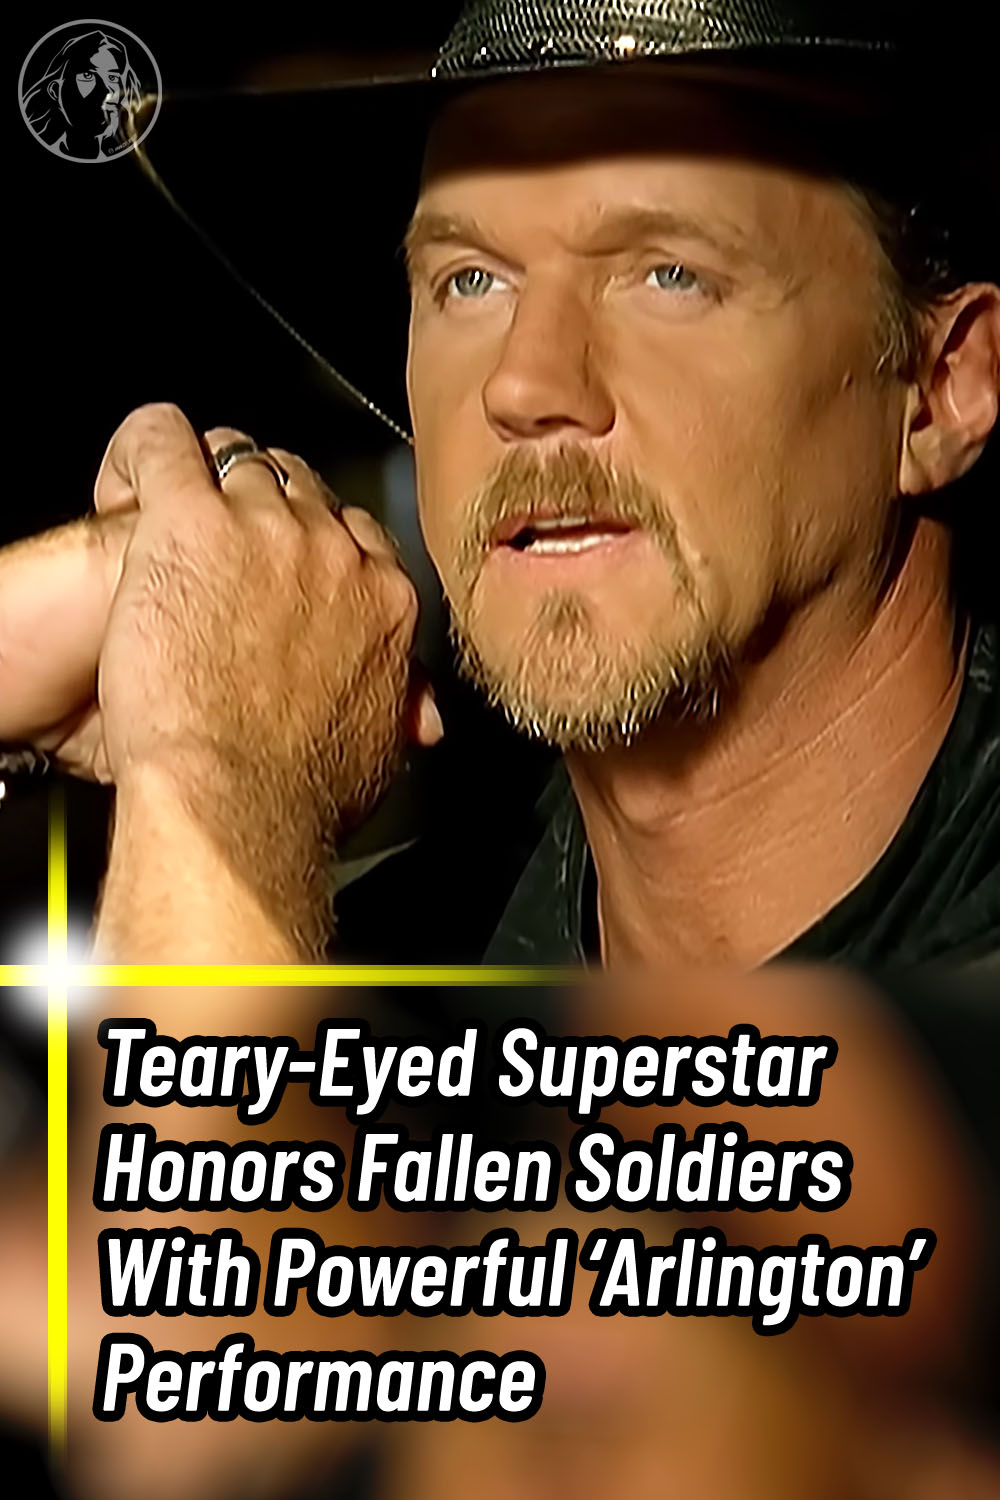 Teary-Eyed Superstar Honors Fallen Soldiers With Powerful ‘Arlington’ Performance